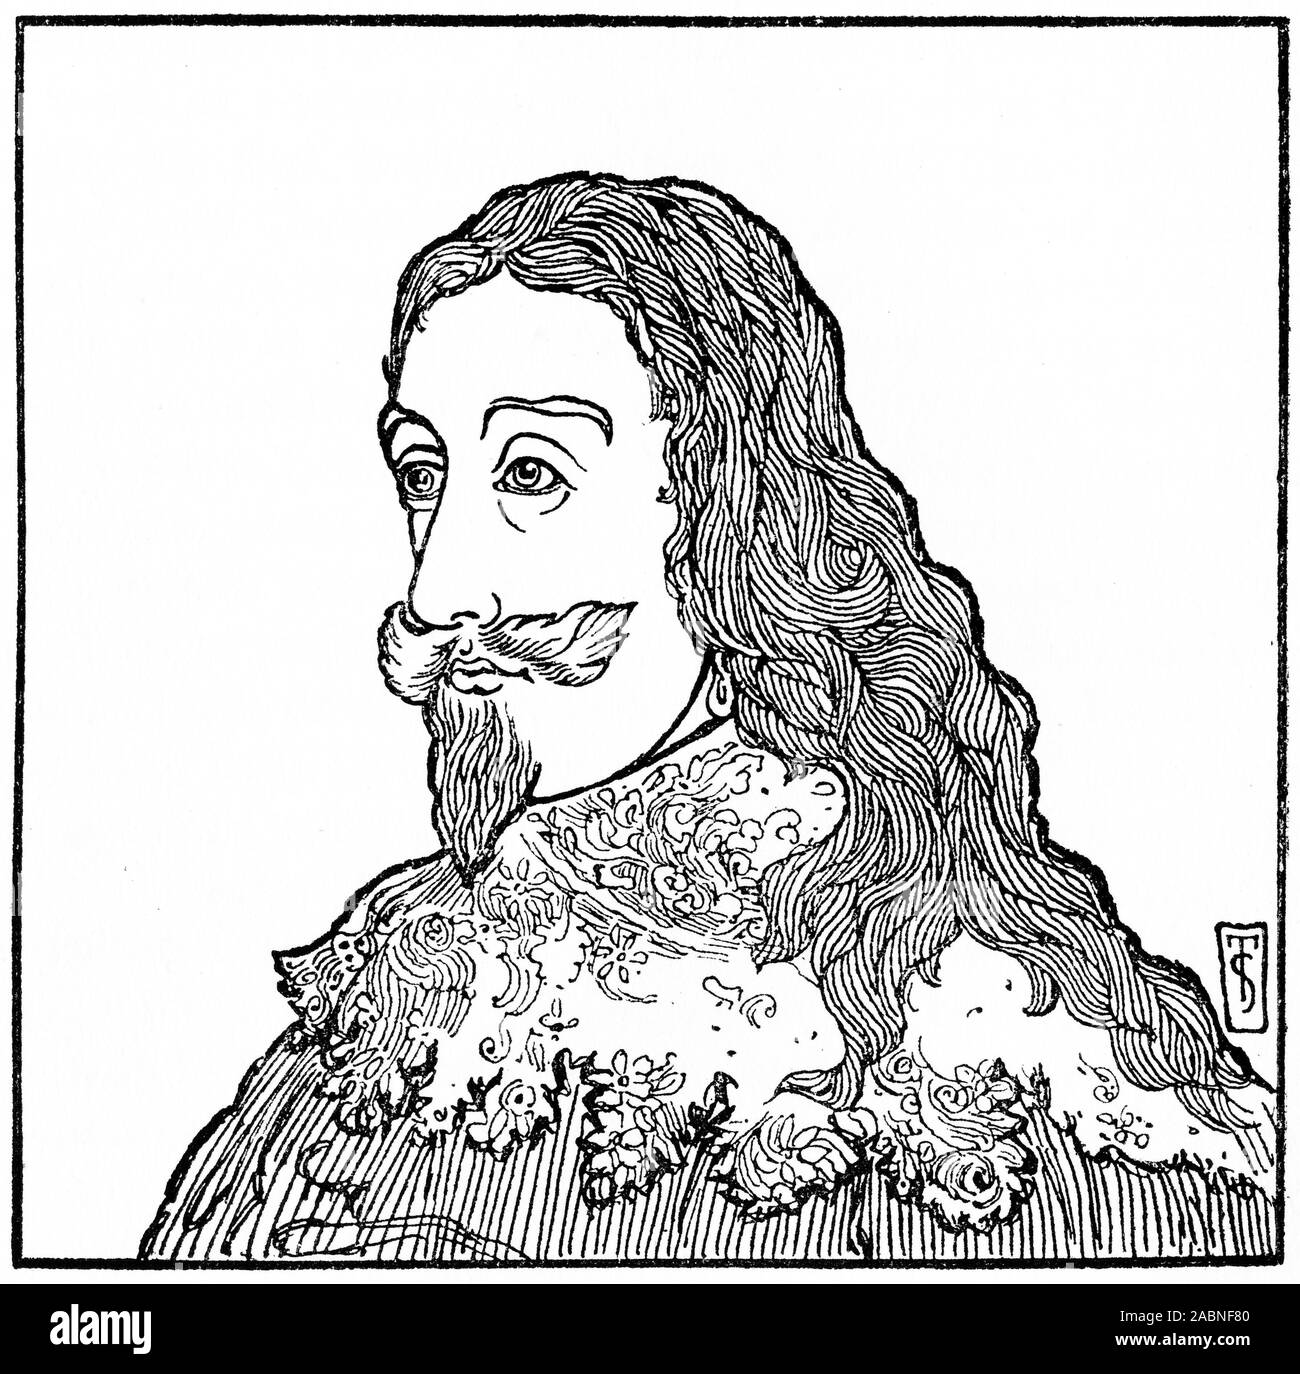 Engraved portrait of Charles I (1600 – 1649) King of England, King of Scotland, and King of Ireland from 27 March 1625 until his execution in 1649. Stock Photo